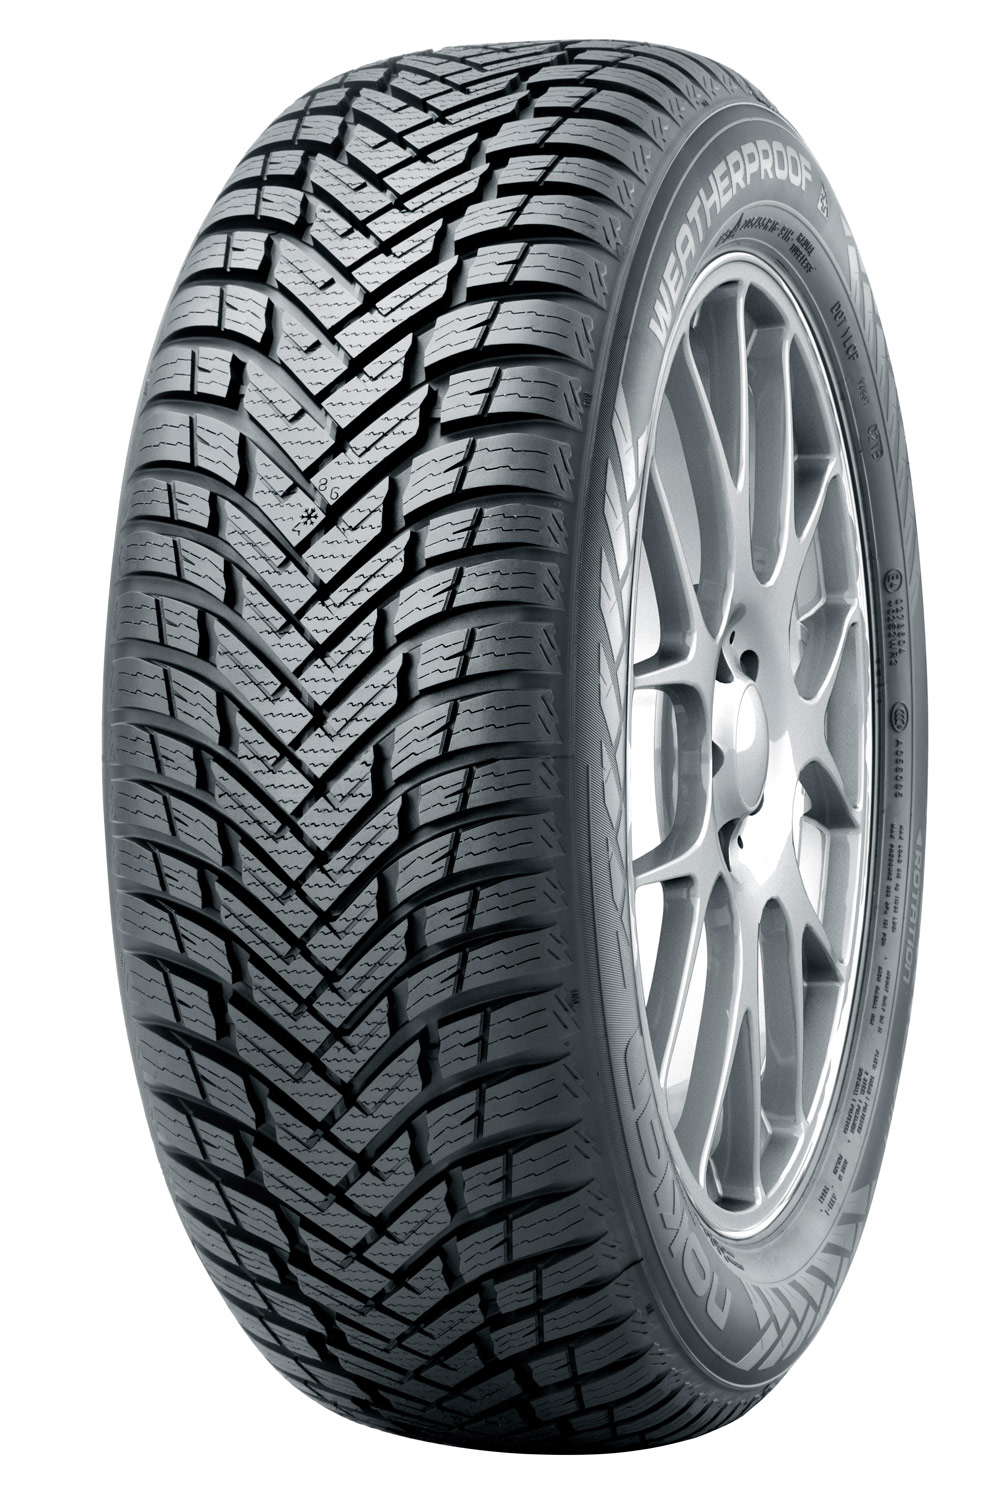 Gomme Nuove Dunlop 185/60 R15 88T WIN RESPONSE 2 XL M+S pneumatici nuovi Invernale